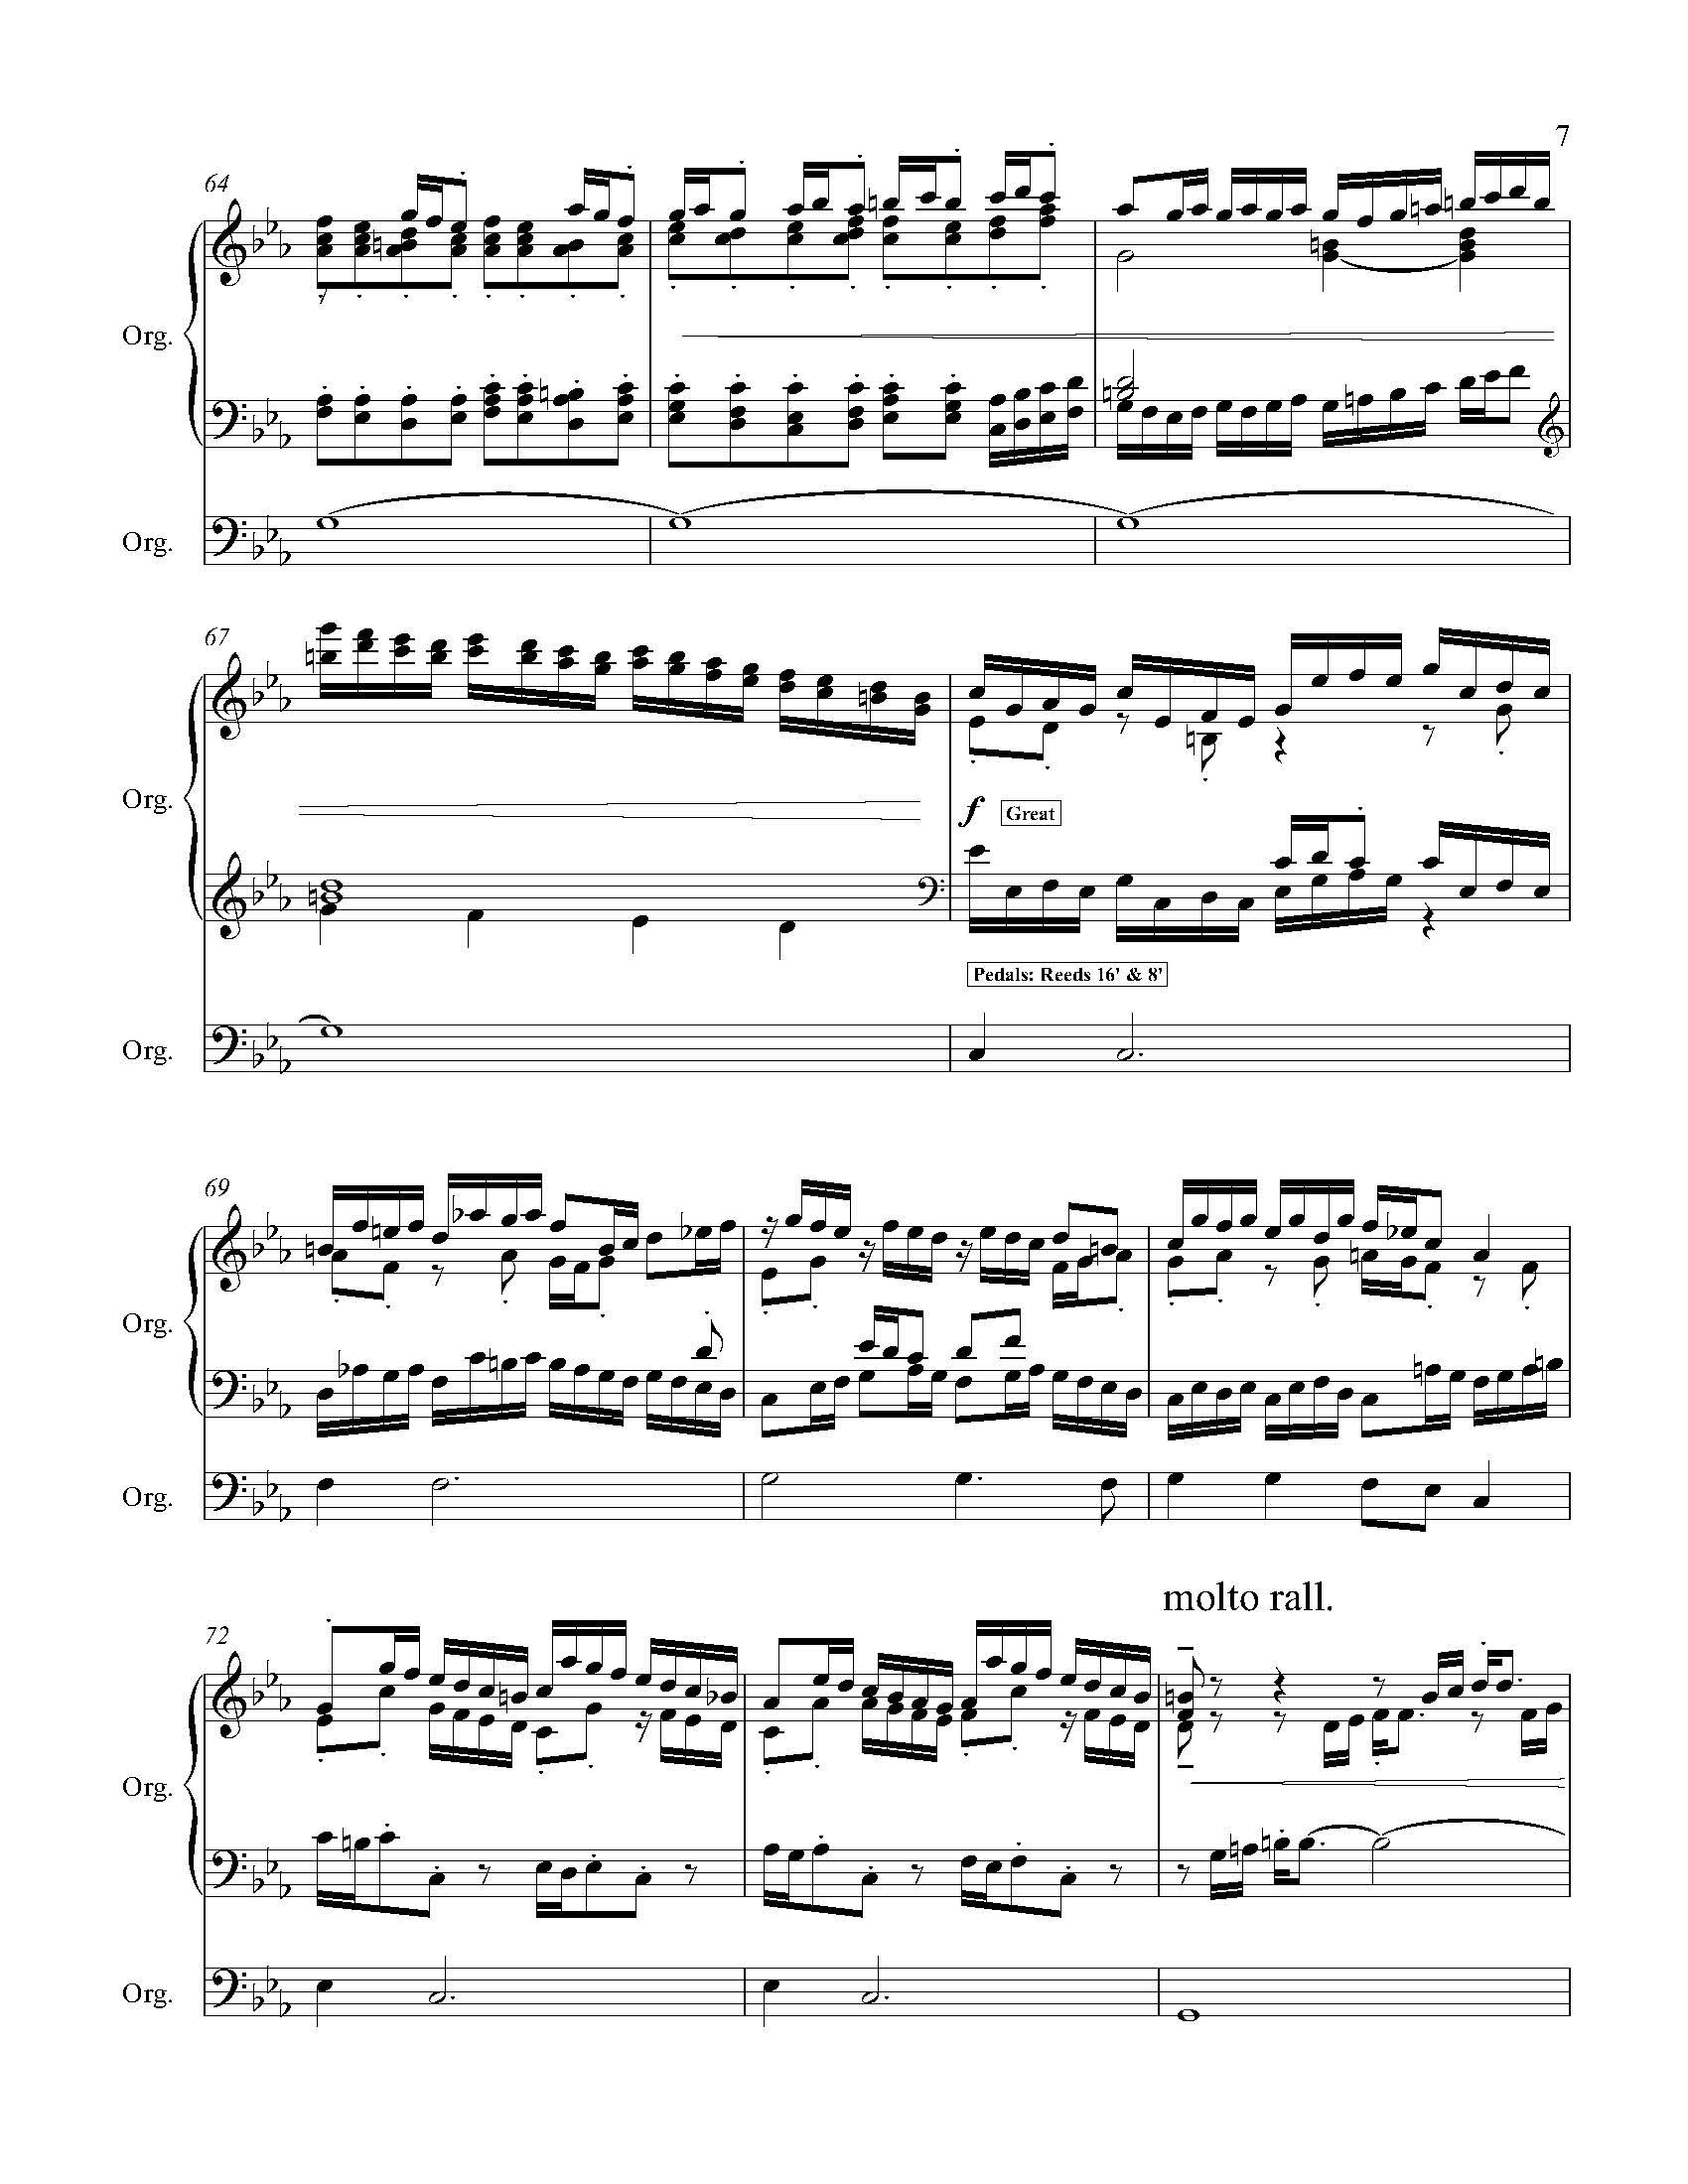 Baroque Fantasy on Go Down Moses - Complete Score_Page_13.jpg